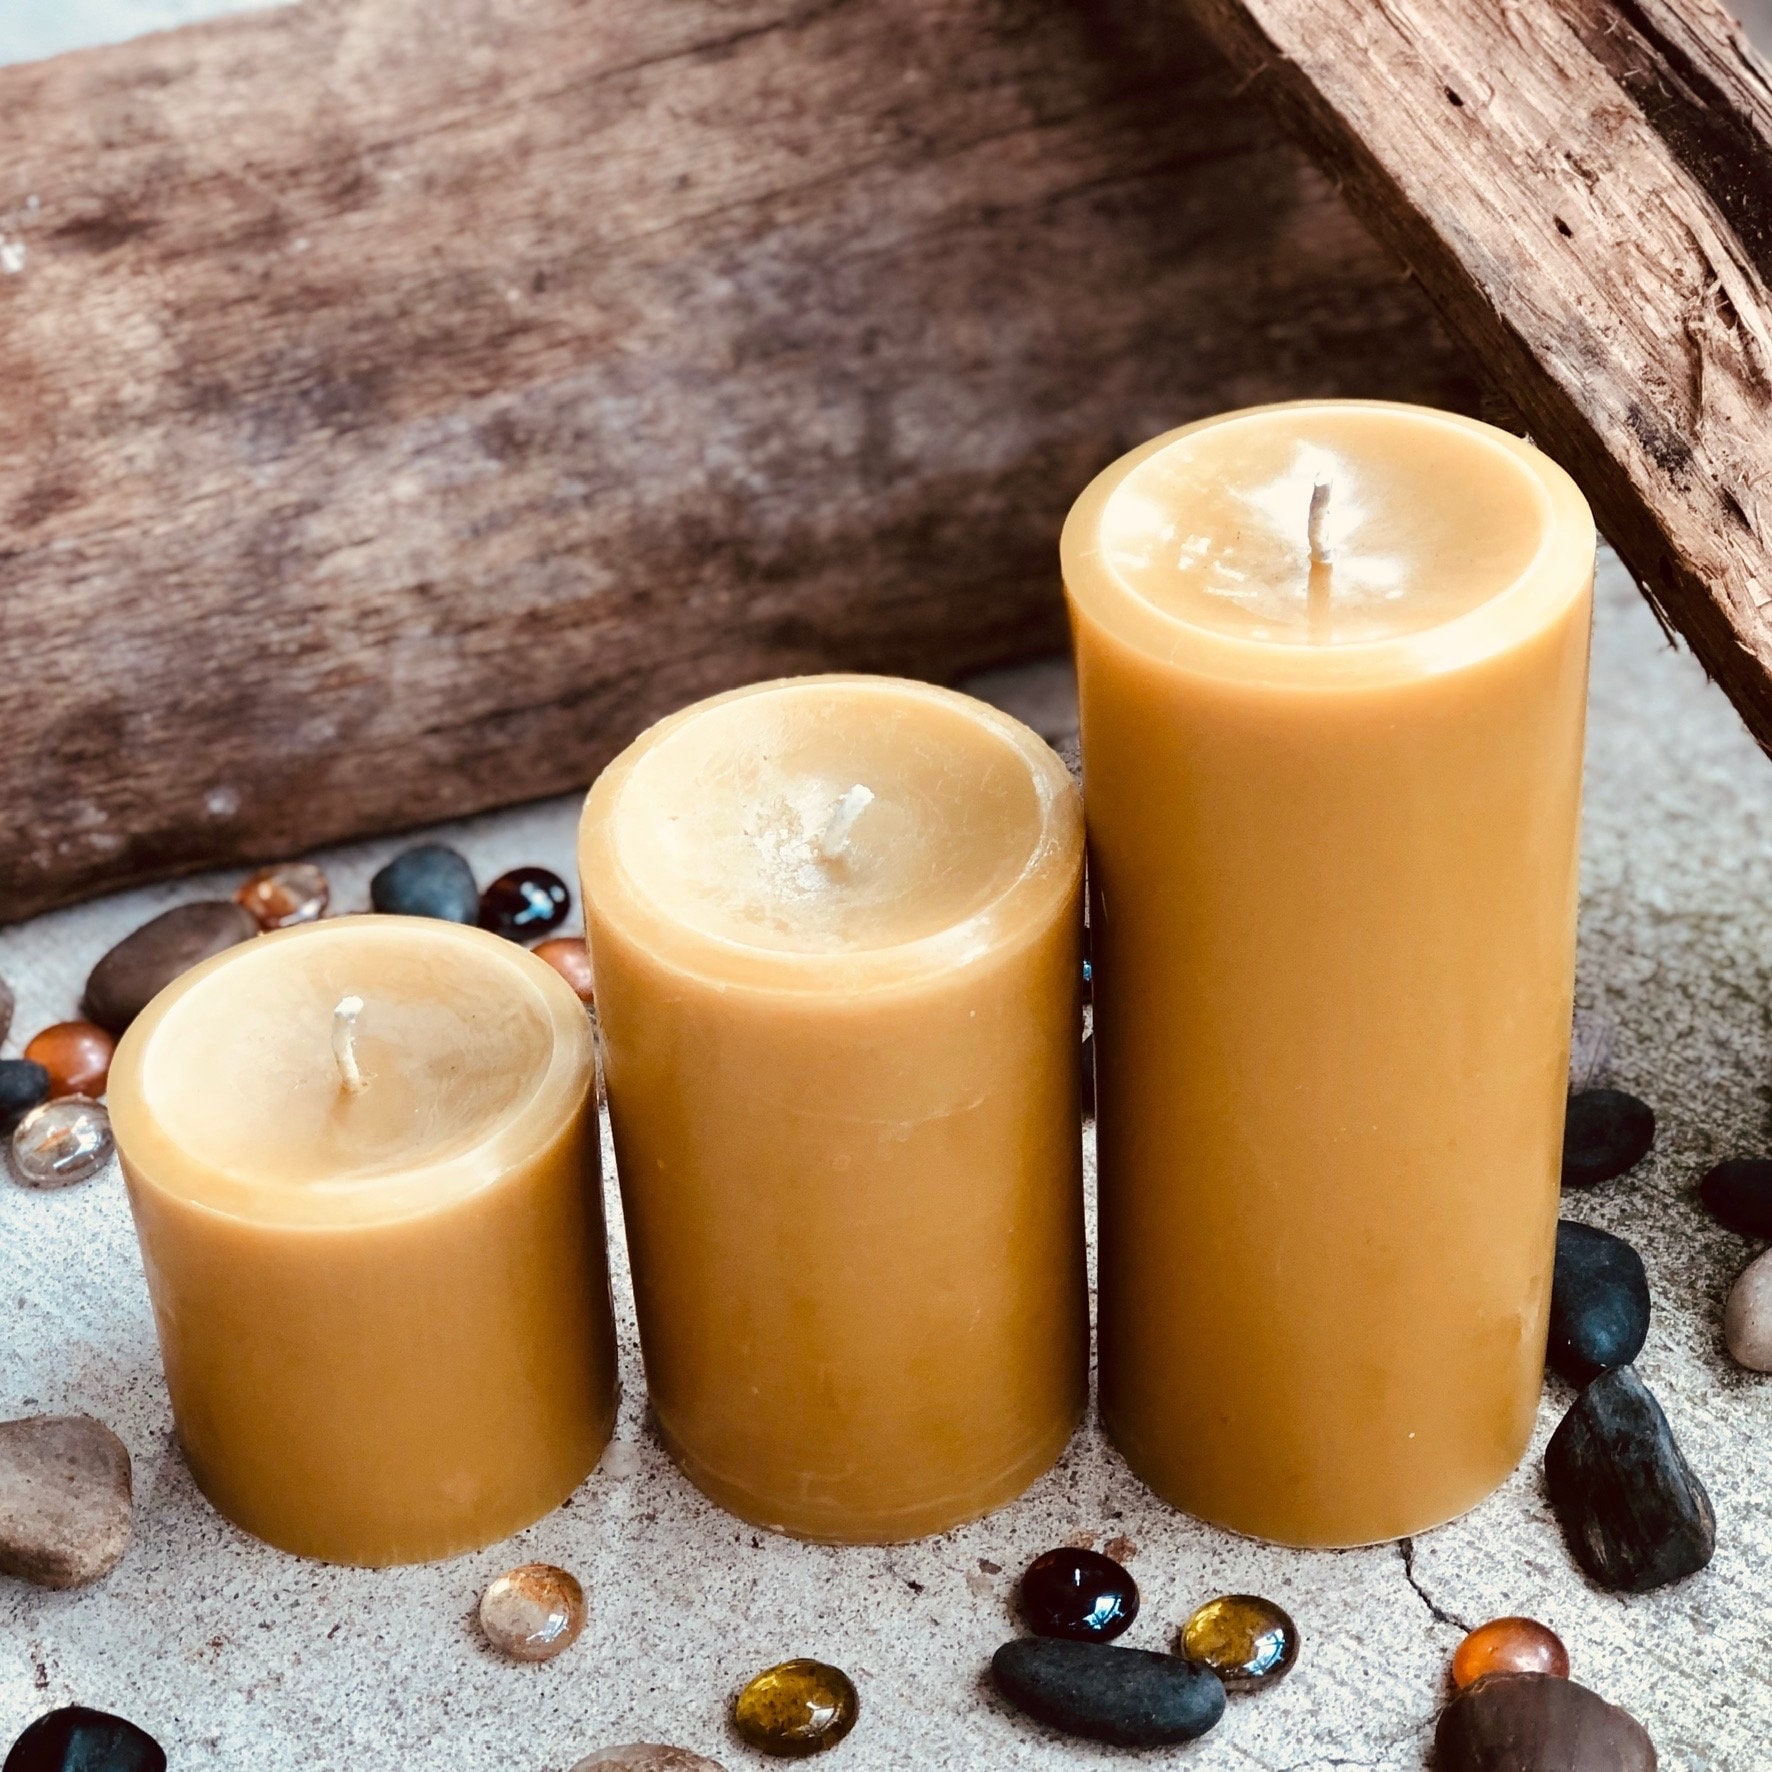 Set of 3 Beeswax Prism Candles- 100% pure beeswax, cotton wick